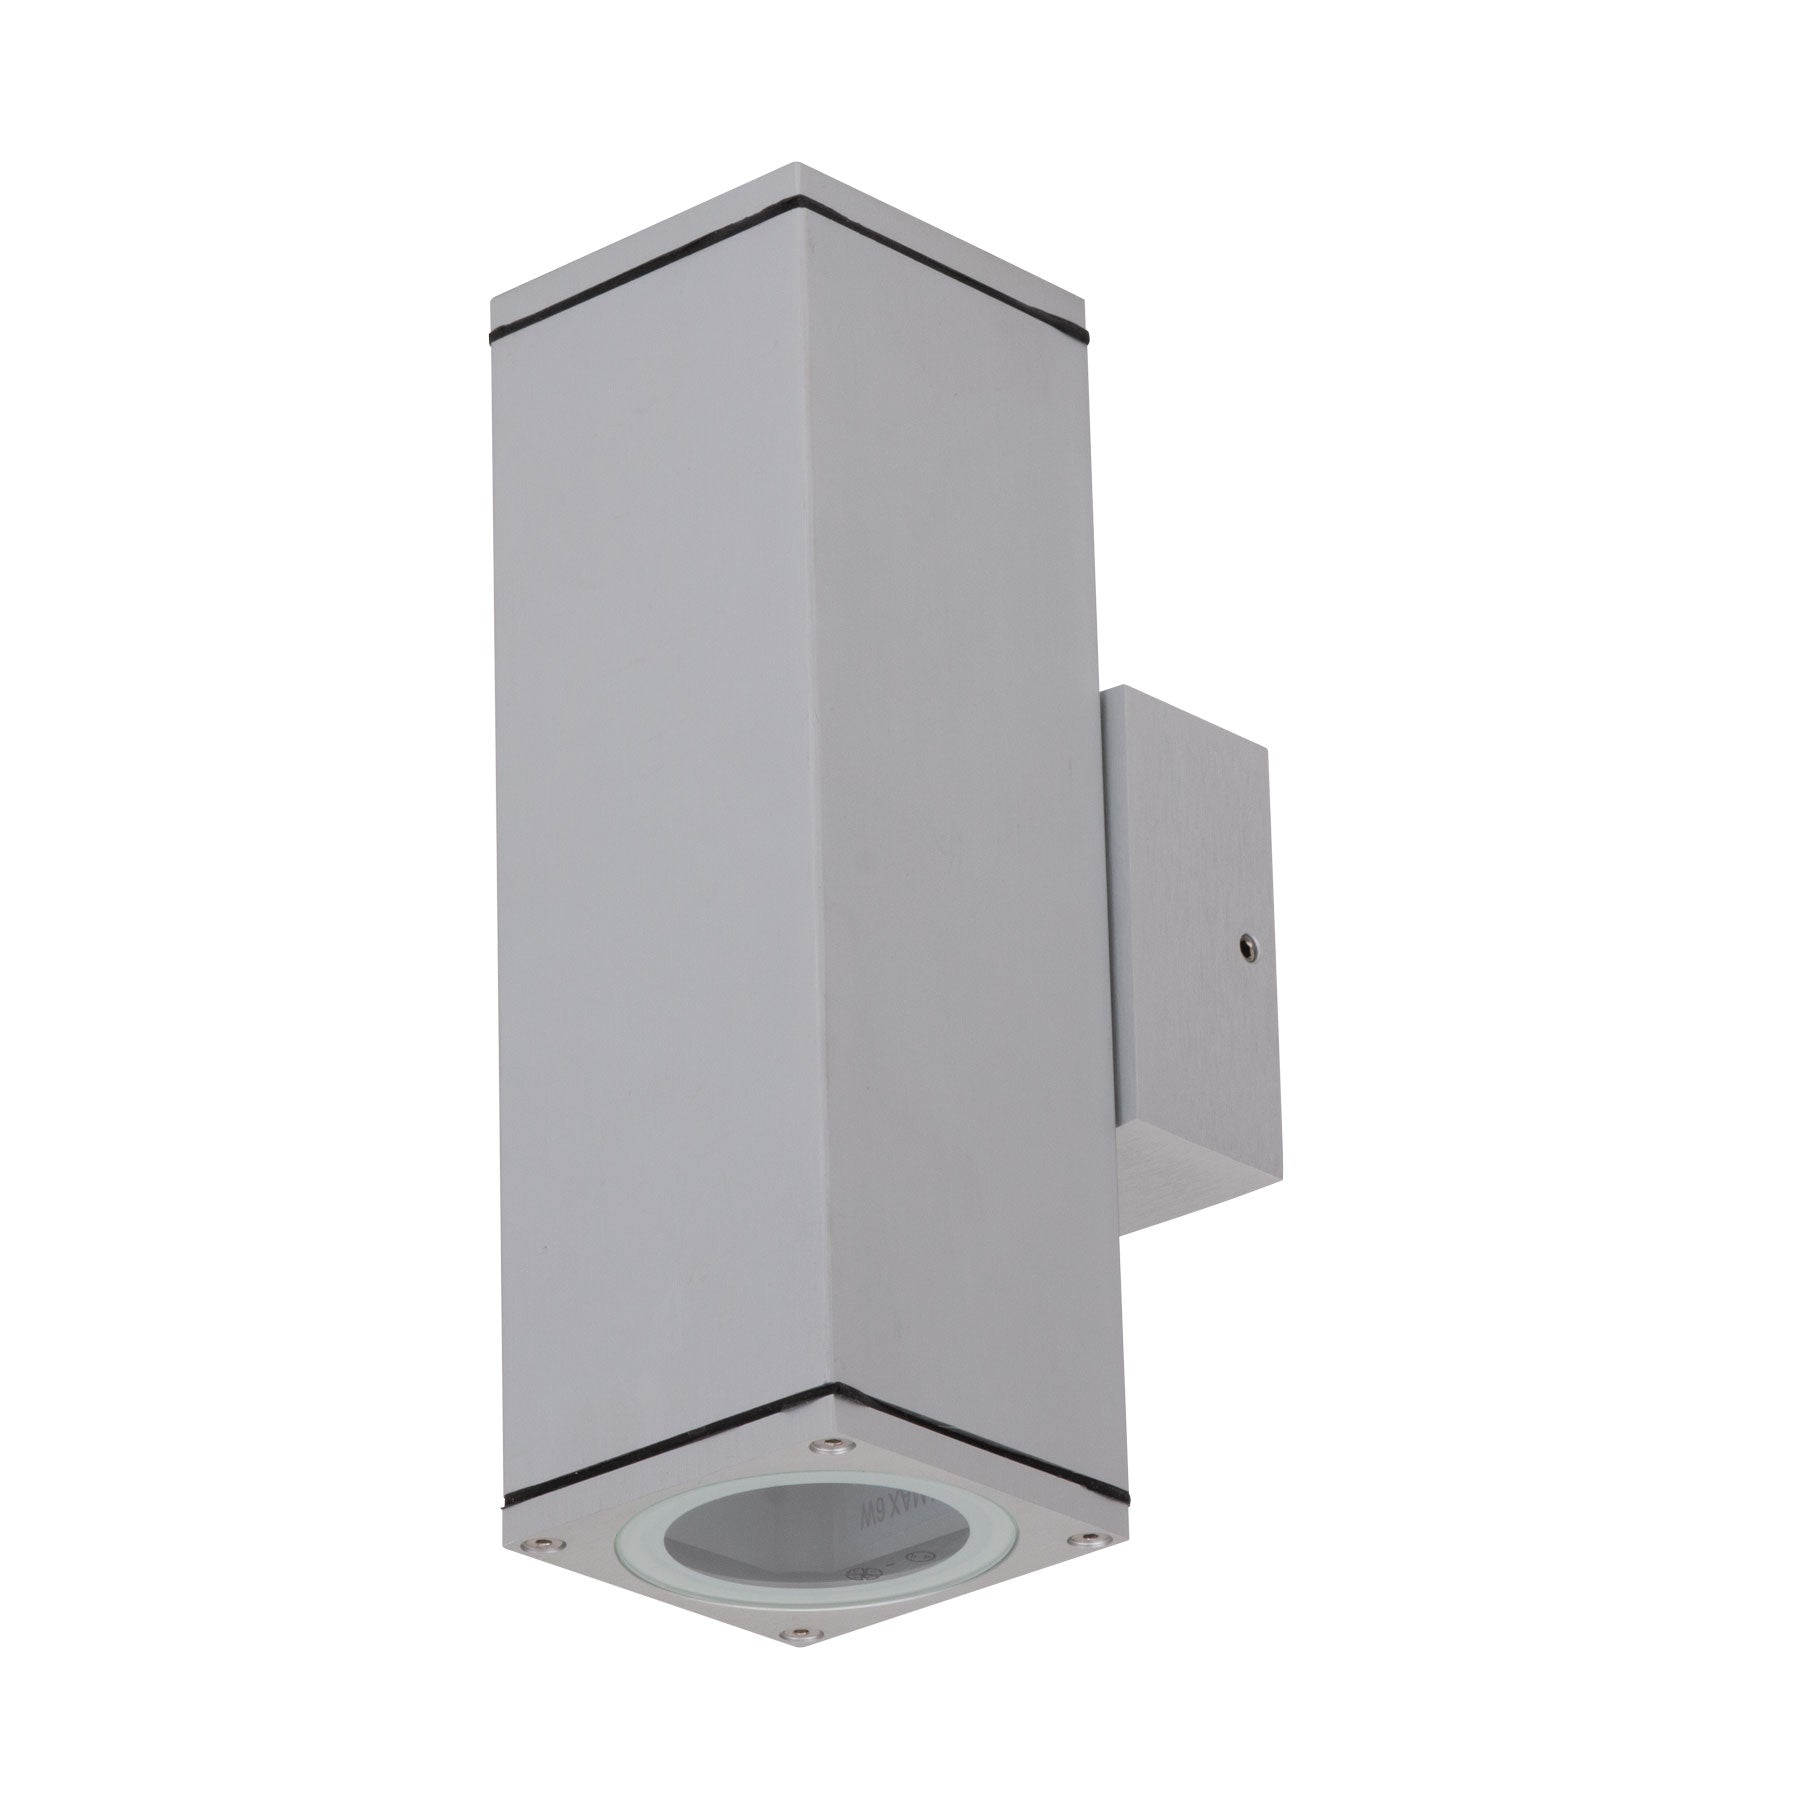 Domus Lighting Outdoor Wall Lights Aluminium / Tri-Colour DOMUS ALPHA-2 EXTERIOR WALL LIGHT WITH OR WITHOUT LAMP Lights-For-You 19133